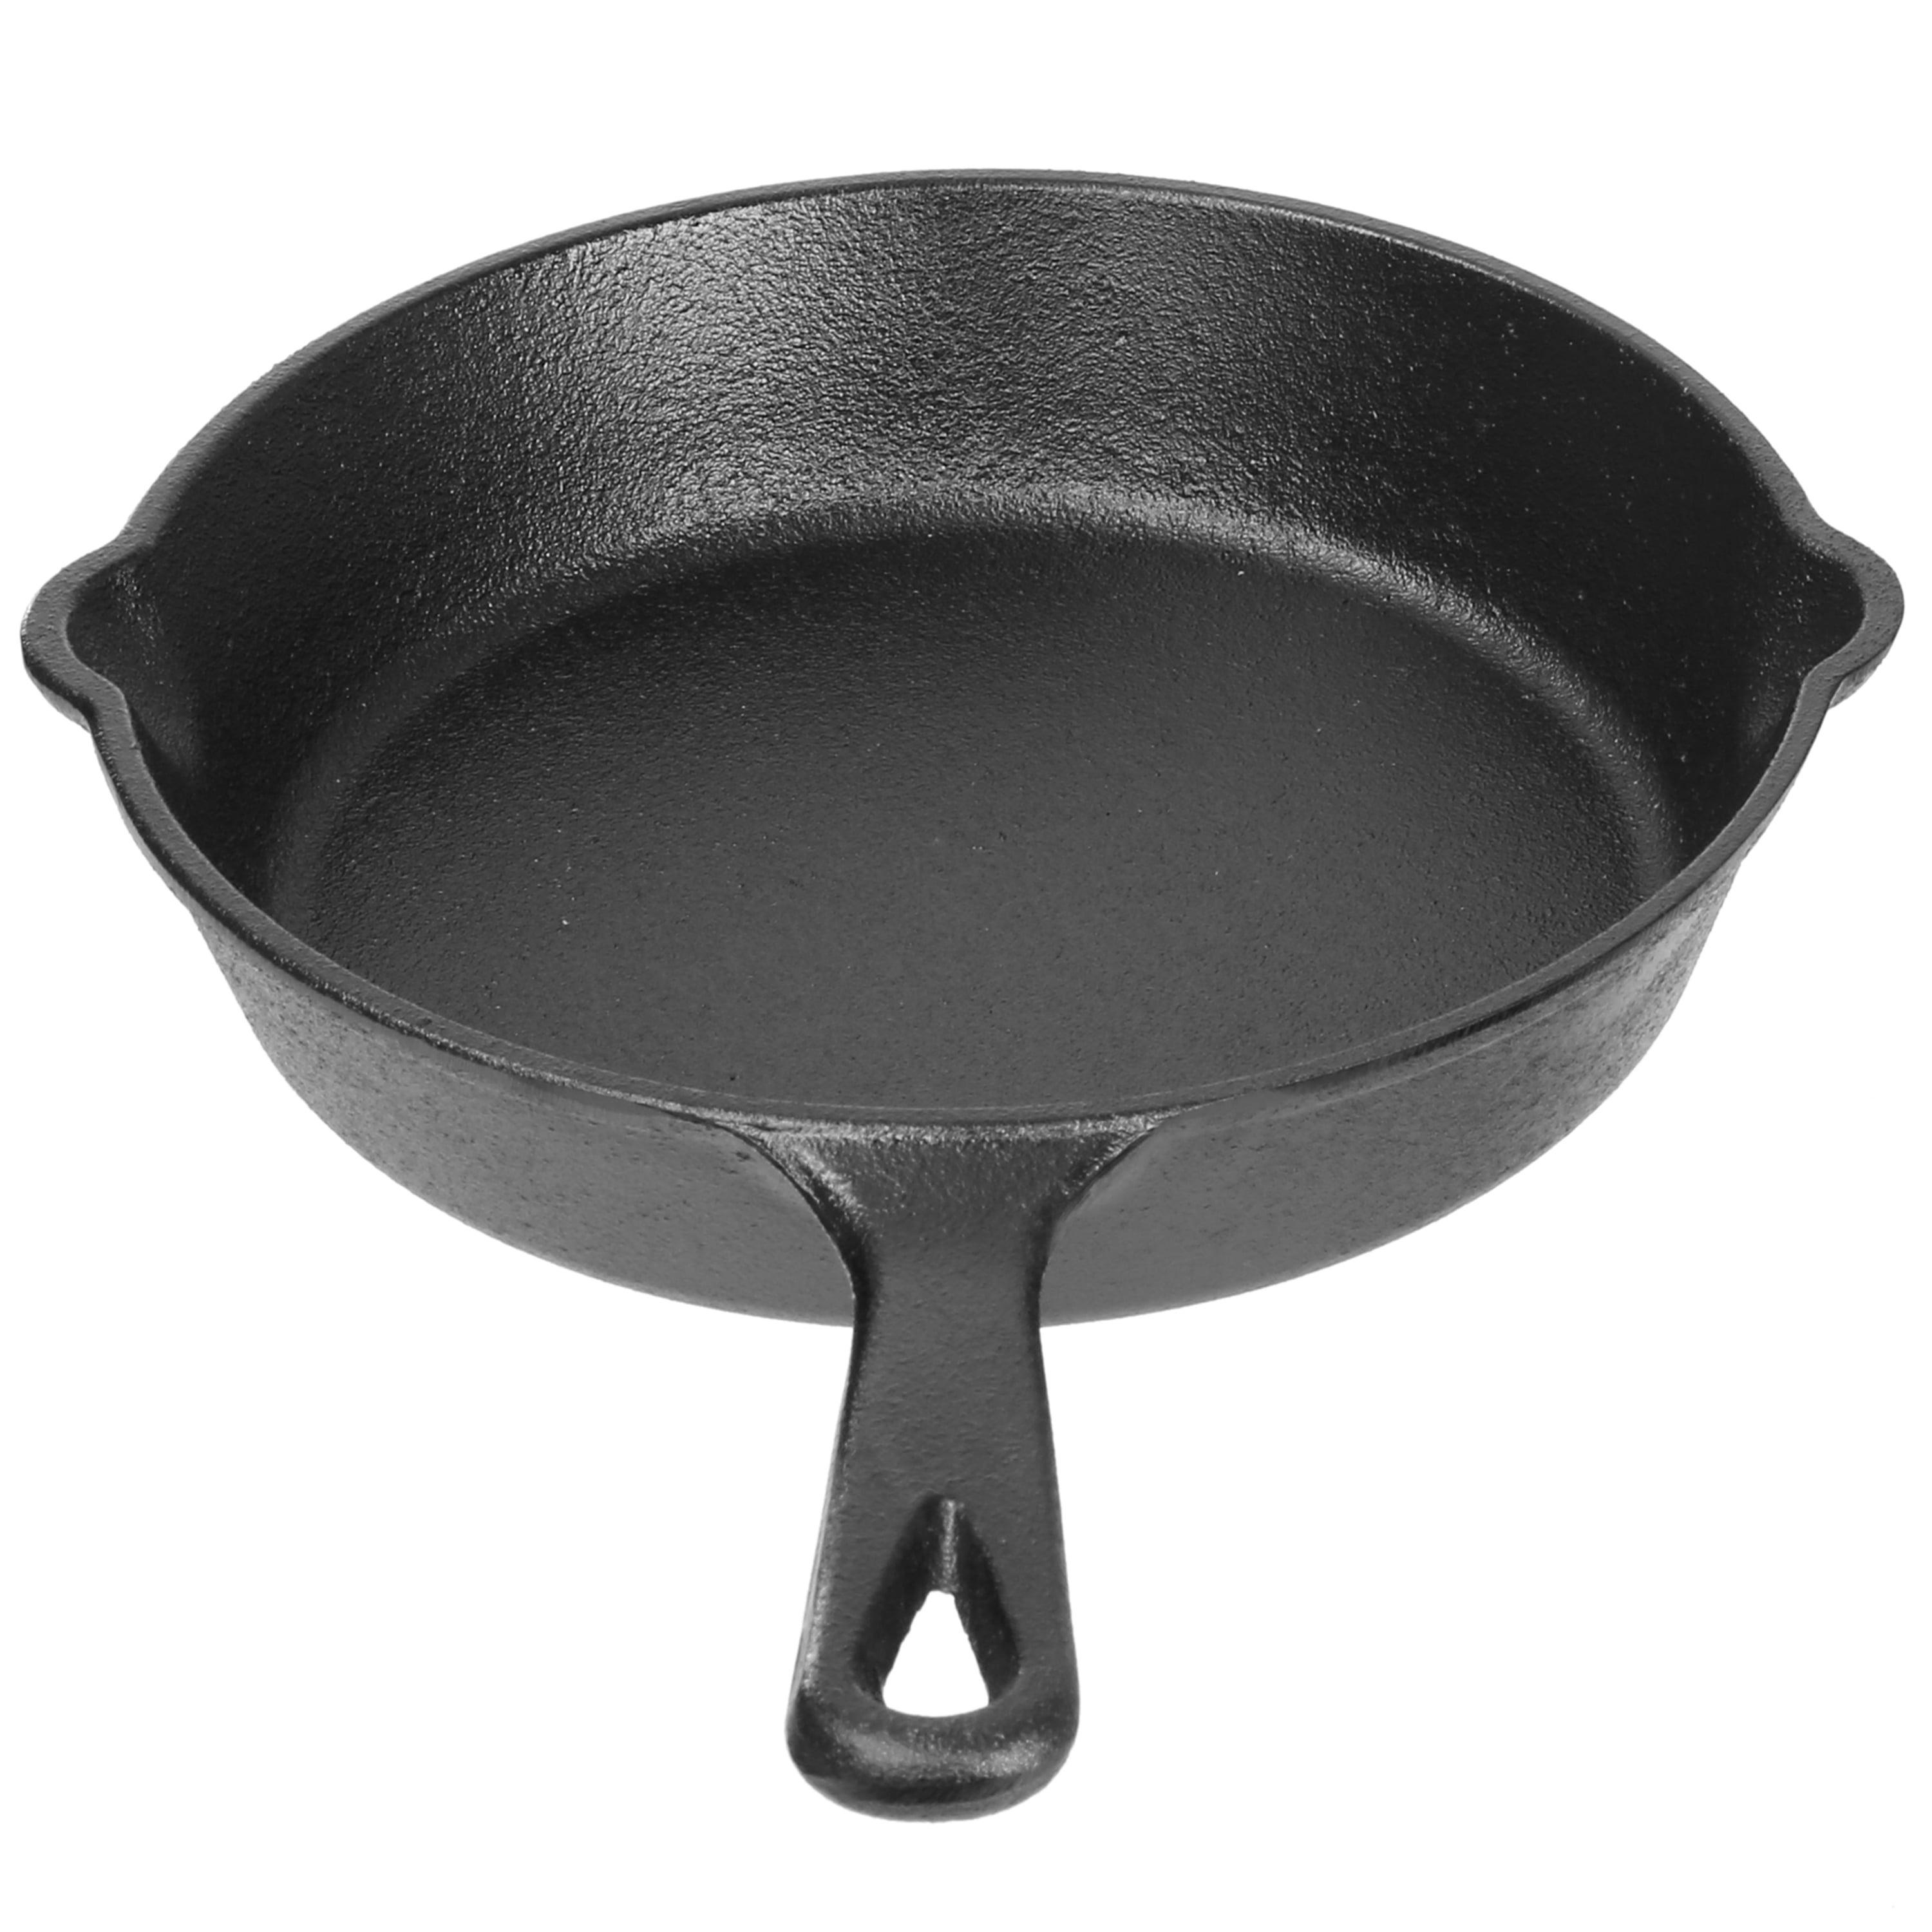 Walmart has these cast iron woks for $50 - anyone able to shed some light  on how well they really work vs my 12 deep pan : r/castiron